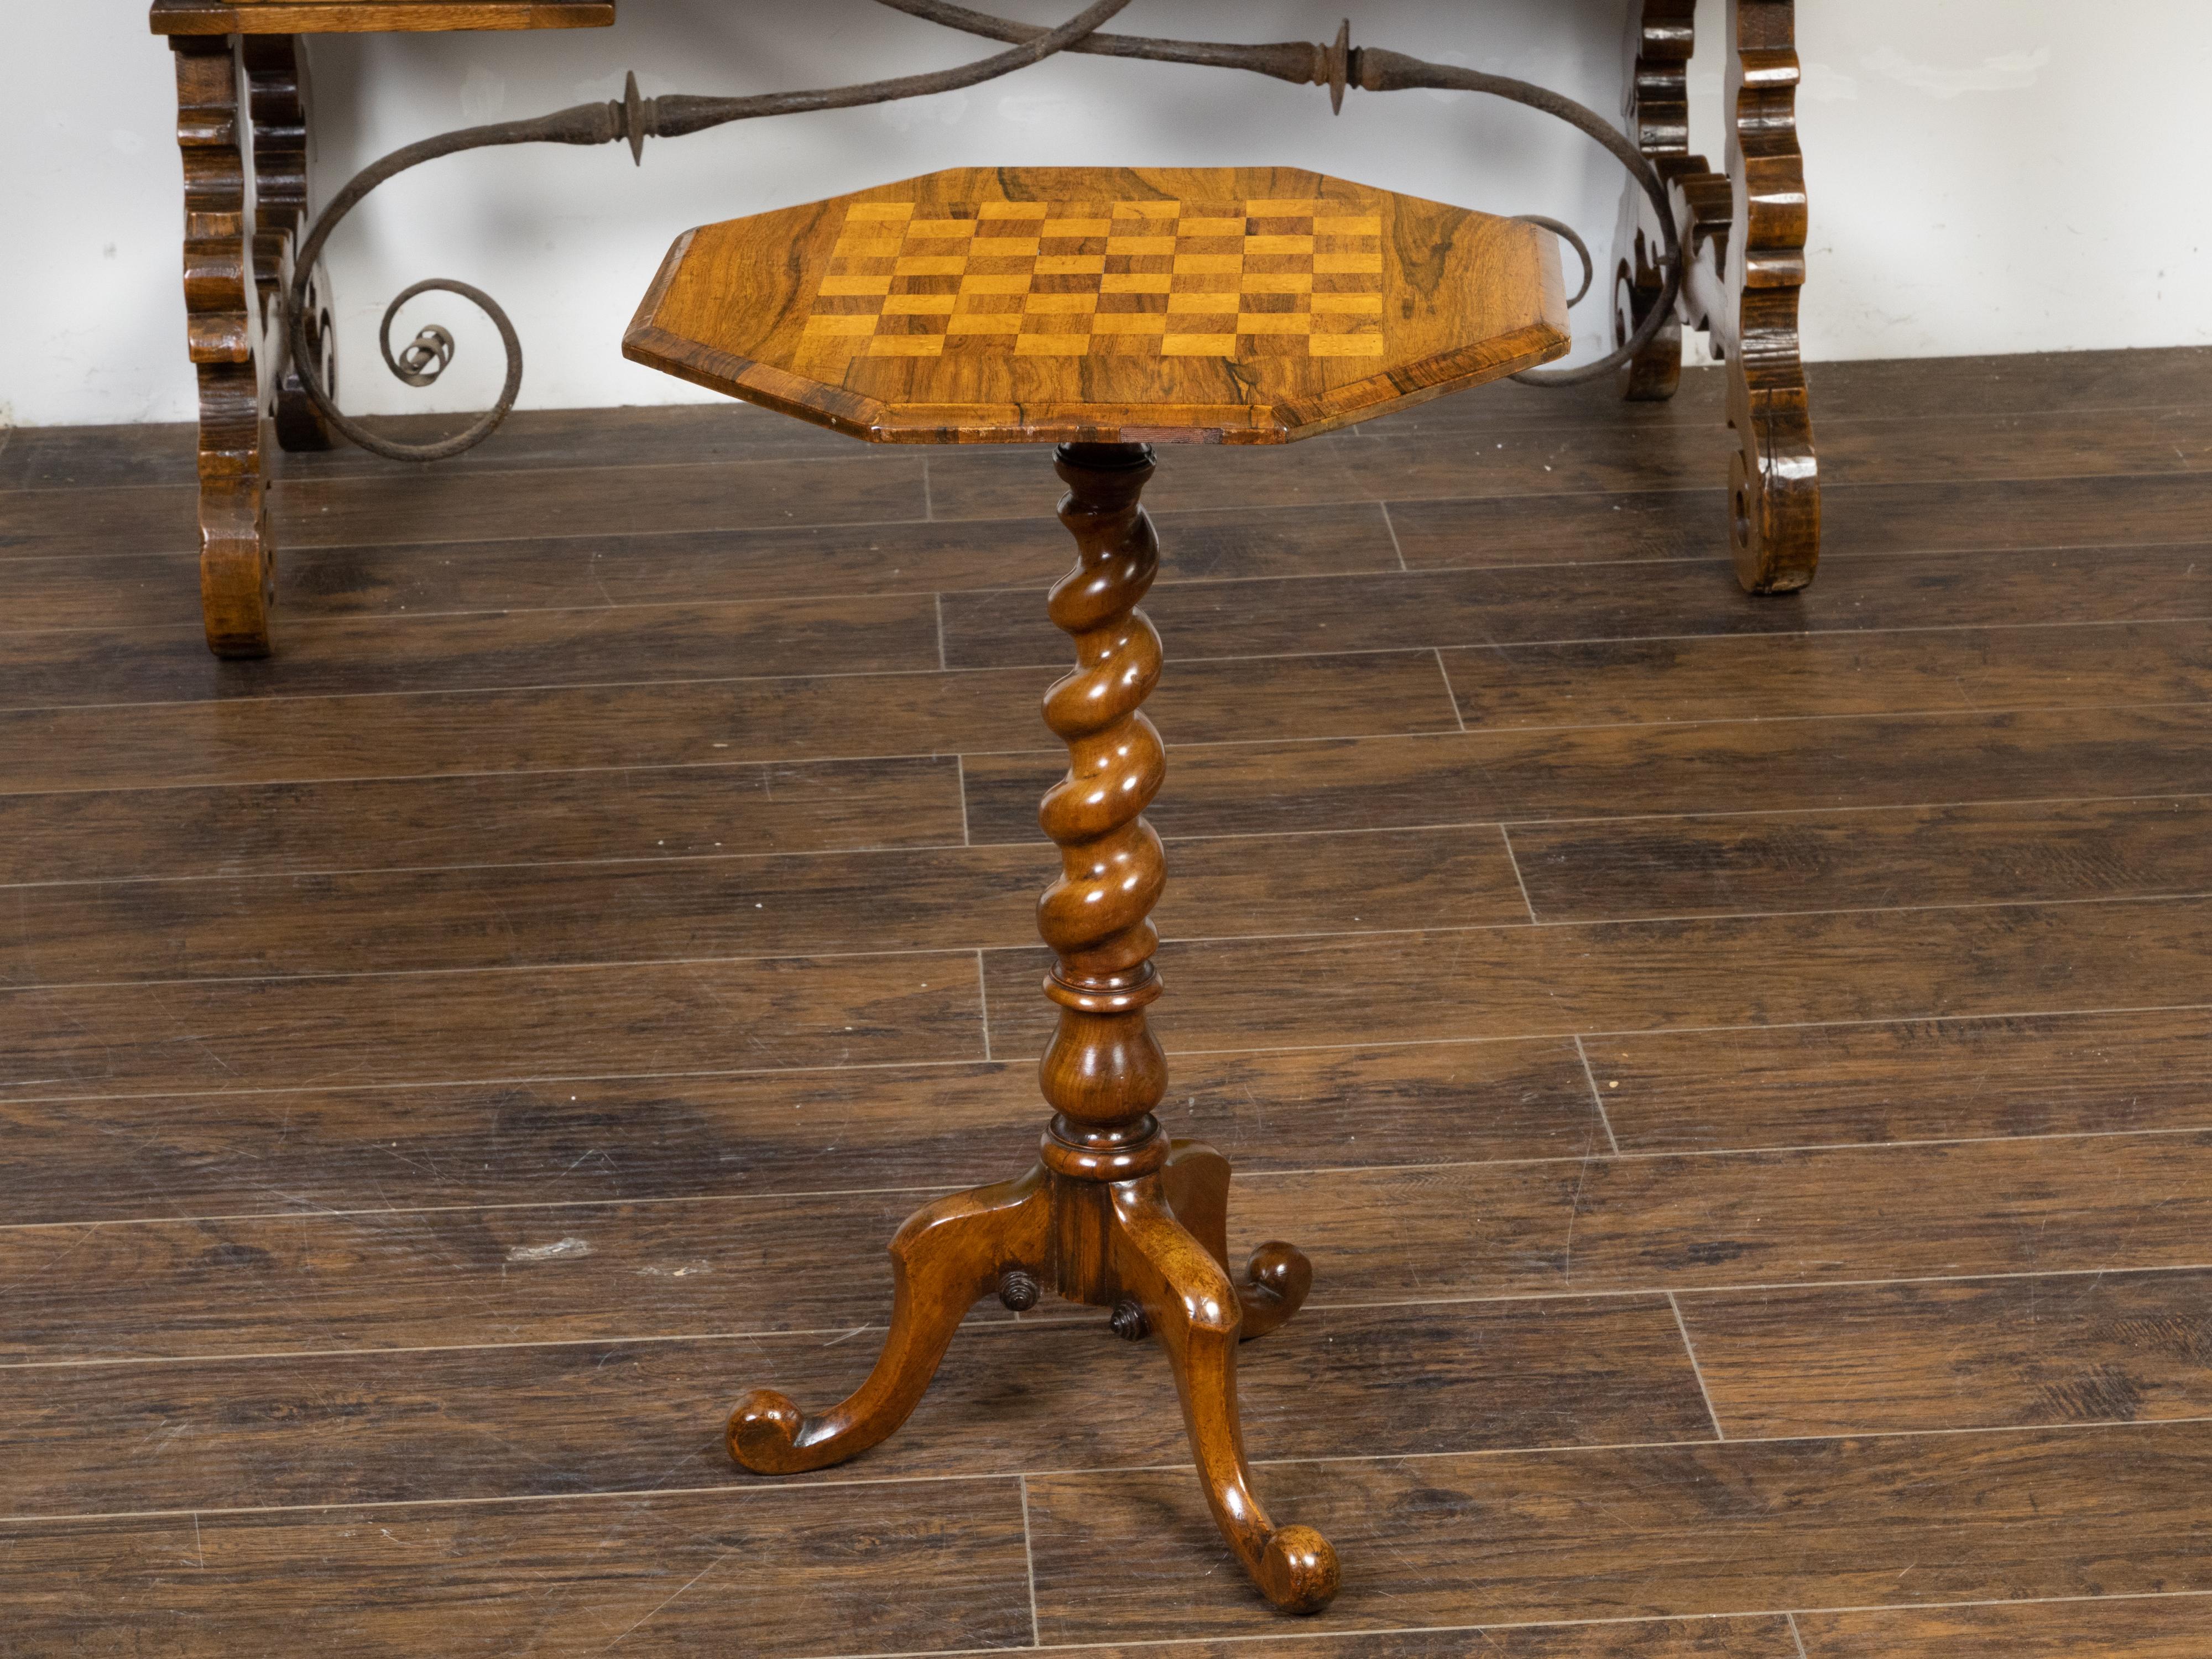 An English wooden guéridon side table from the 19th century, with octagonal top, checkerboard parquetry inlay, twisted pedestal and tripod base. Created in England during the 19th century, this wooden guéridon table features an octagonal top adorned